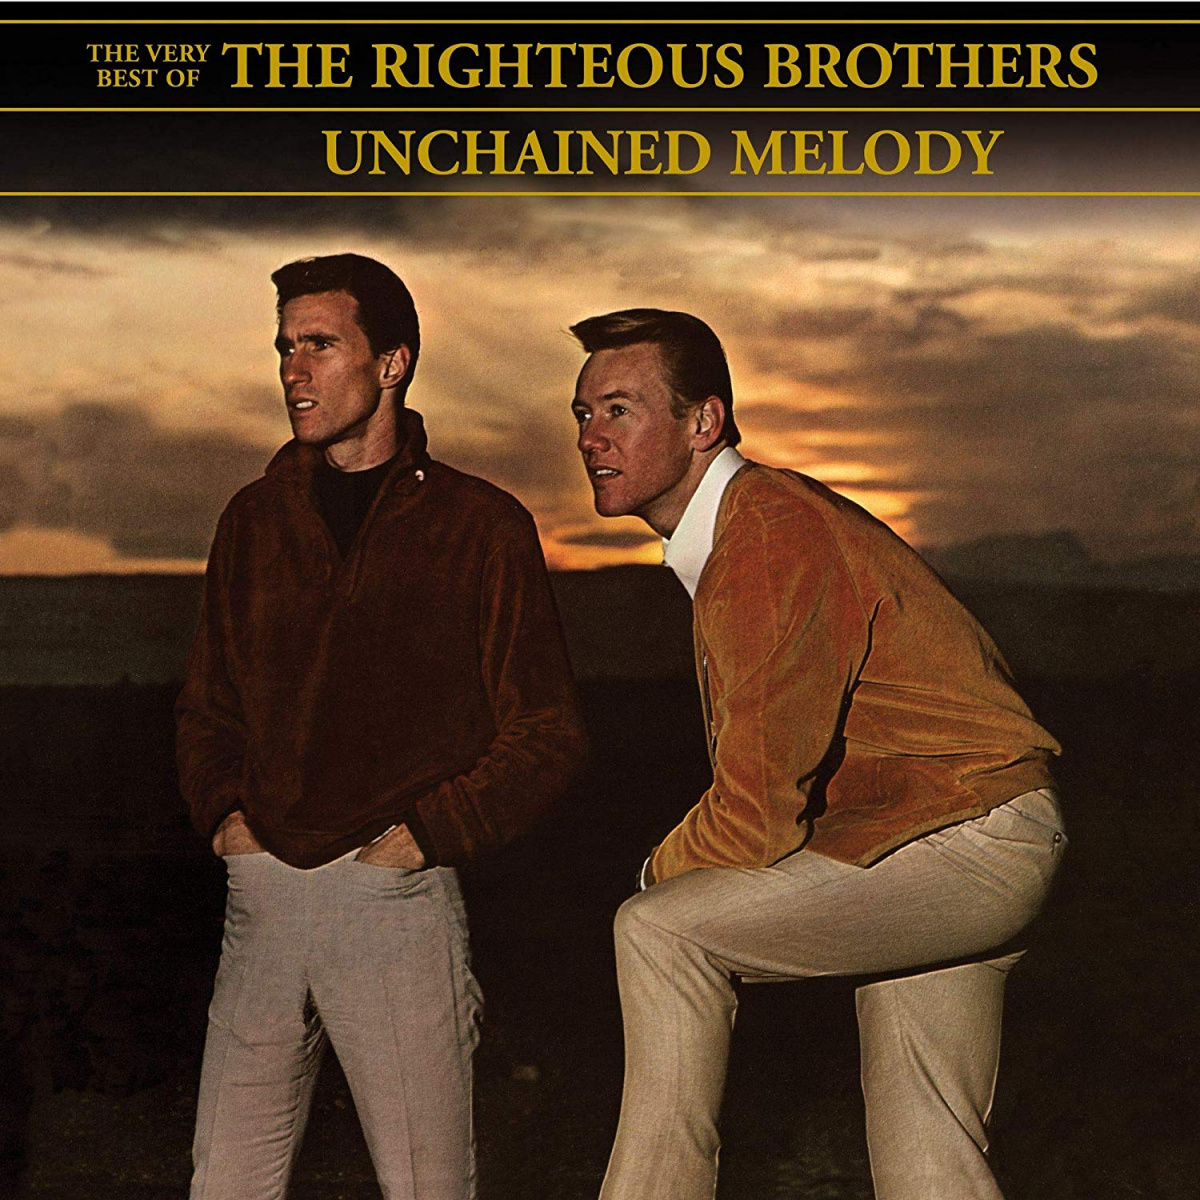 The Righteous Brothers - Unchained Melody ноты для фортепиано